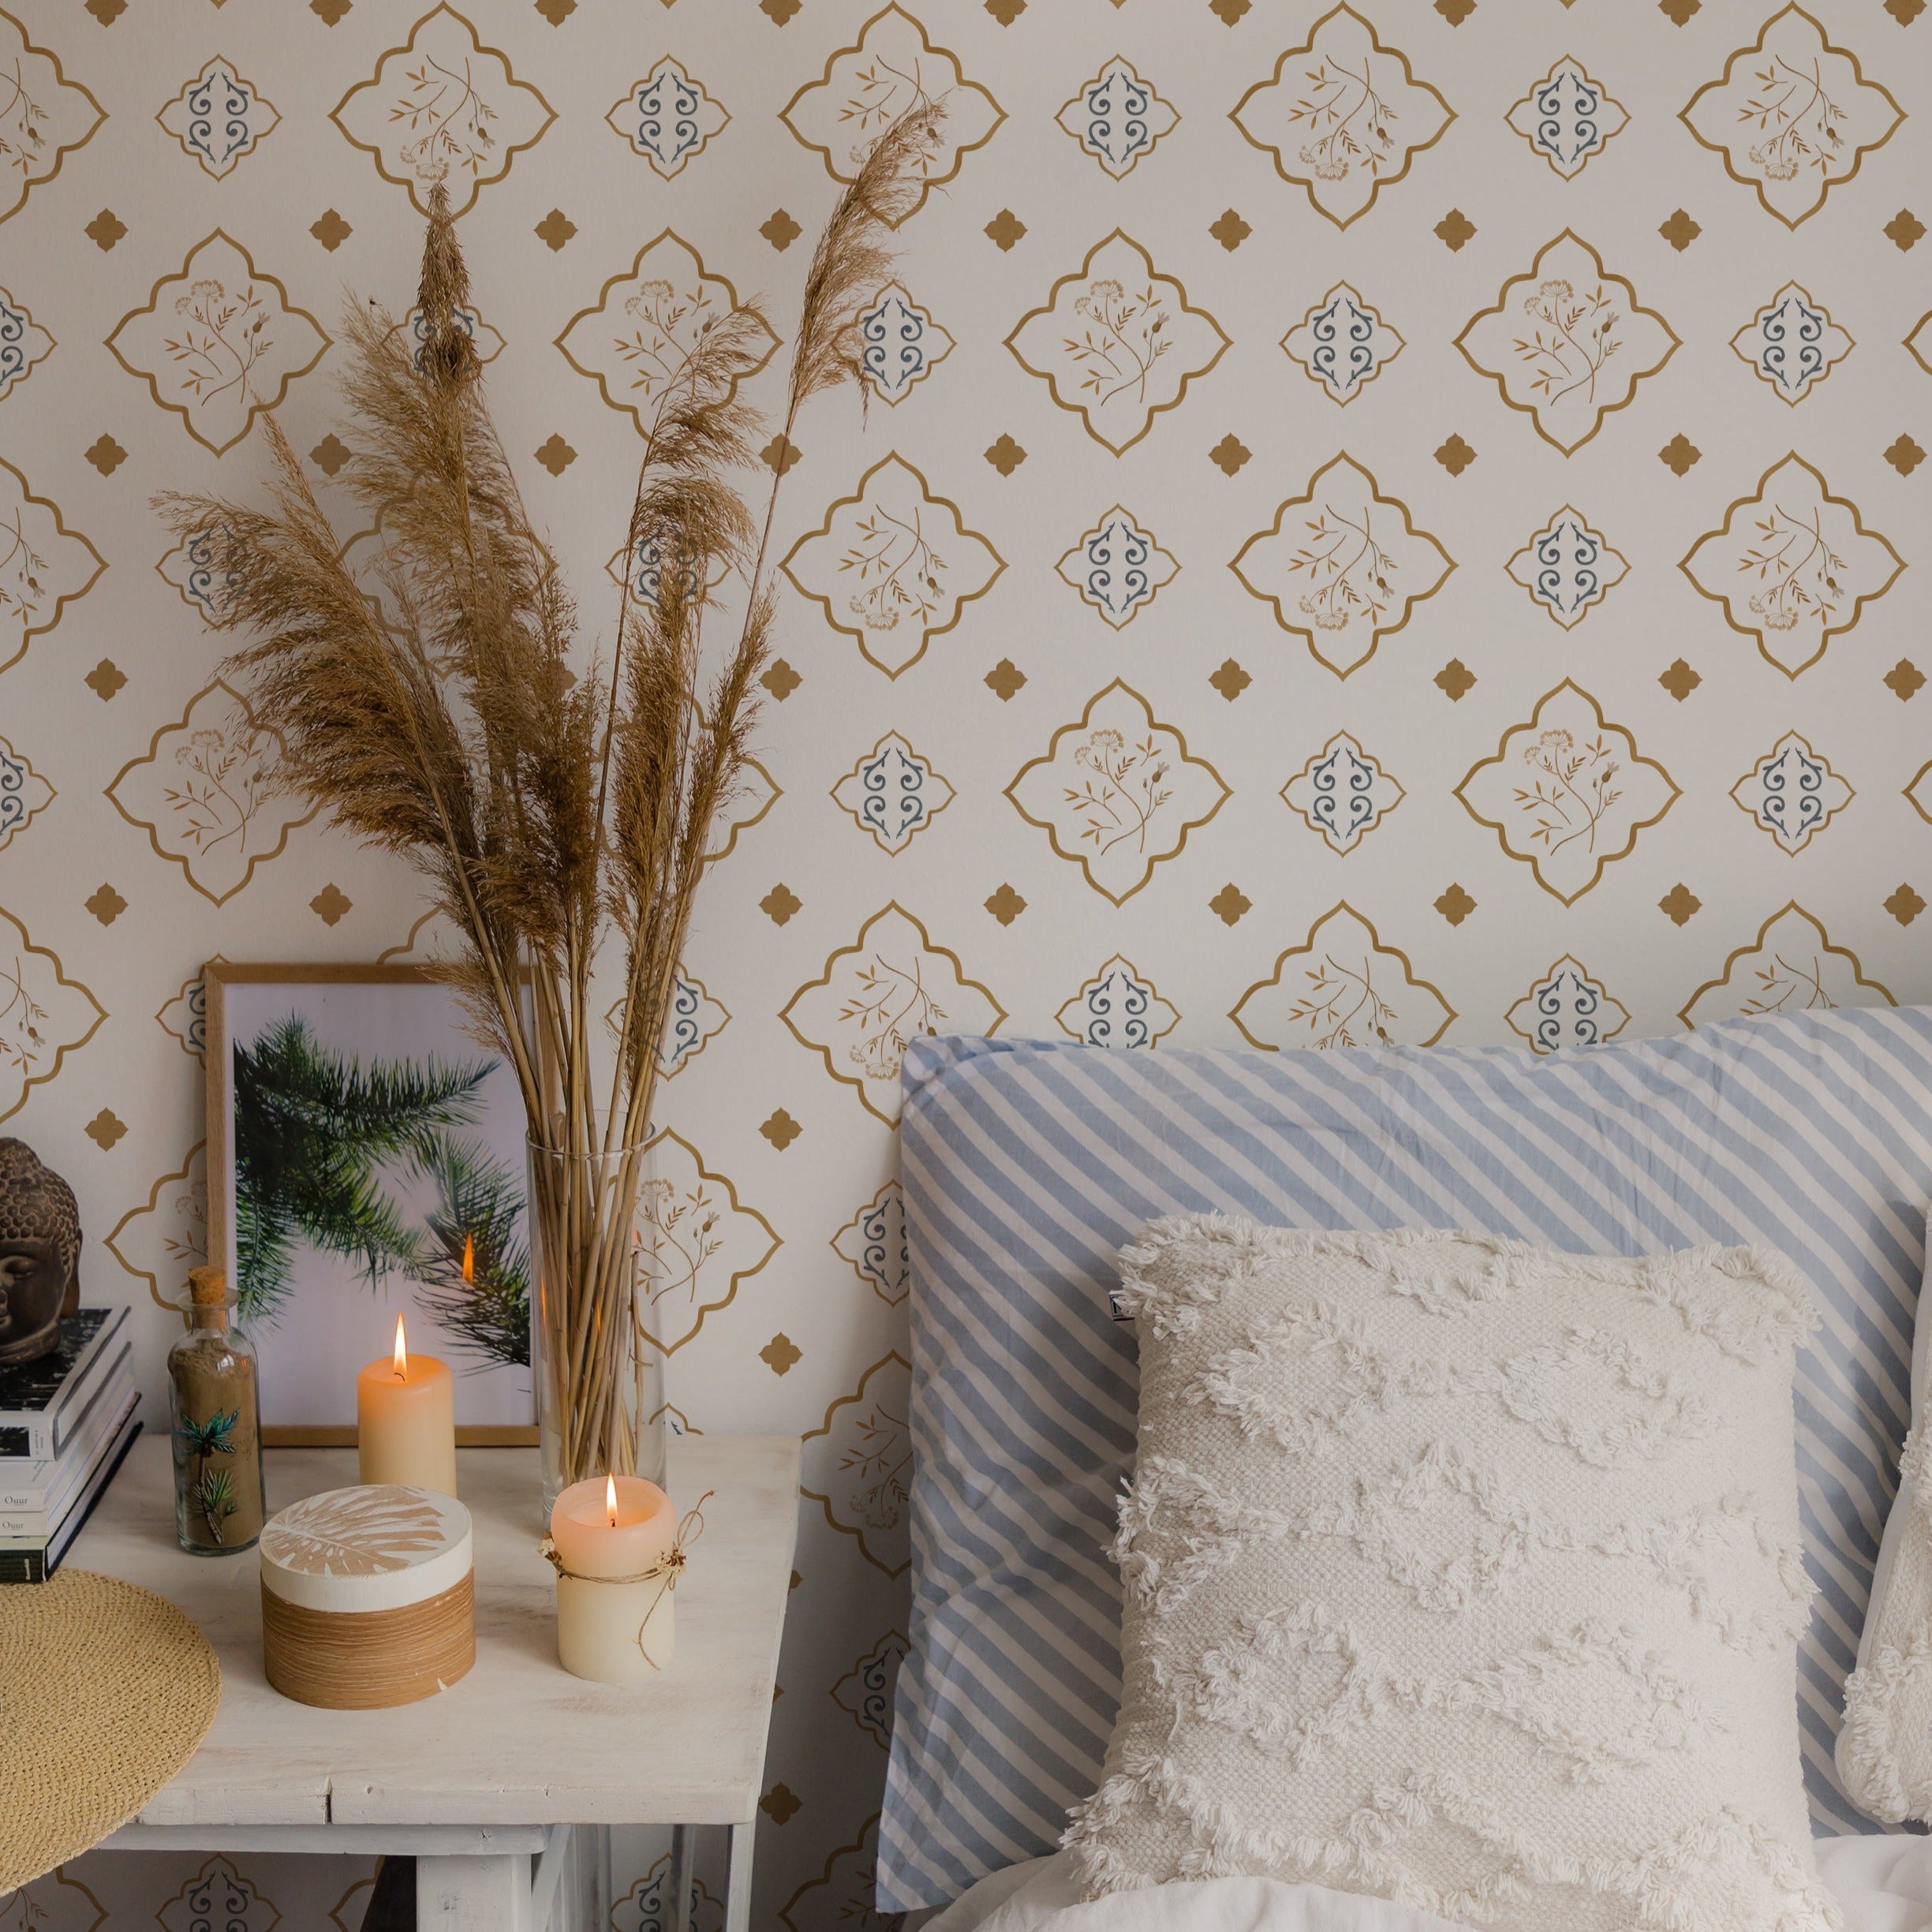 Stylish interior corner decorated with Moroccan Dream Wallpaper, highlighting a comfortable seating area with a striped couch, adorned with candles and a decorative pillow